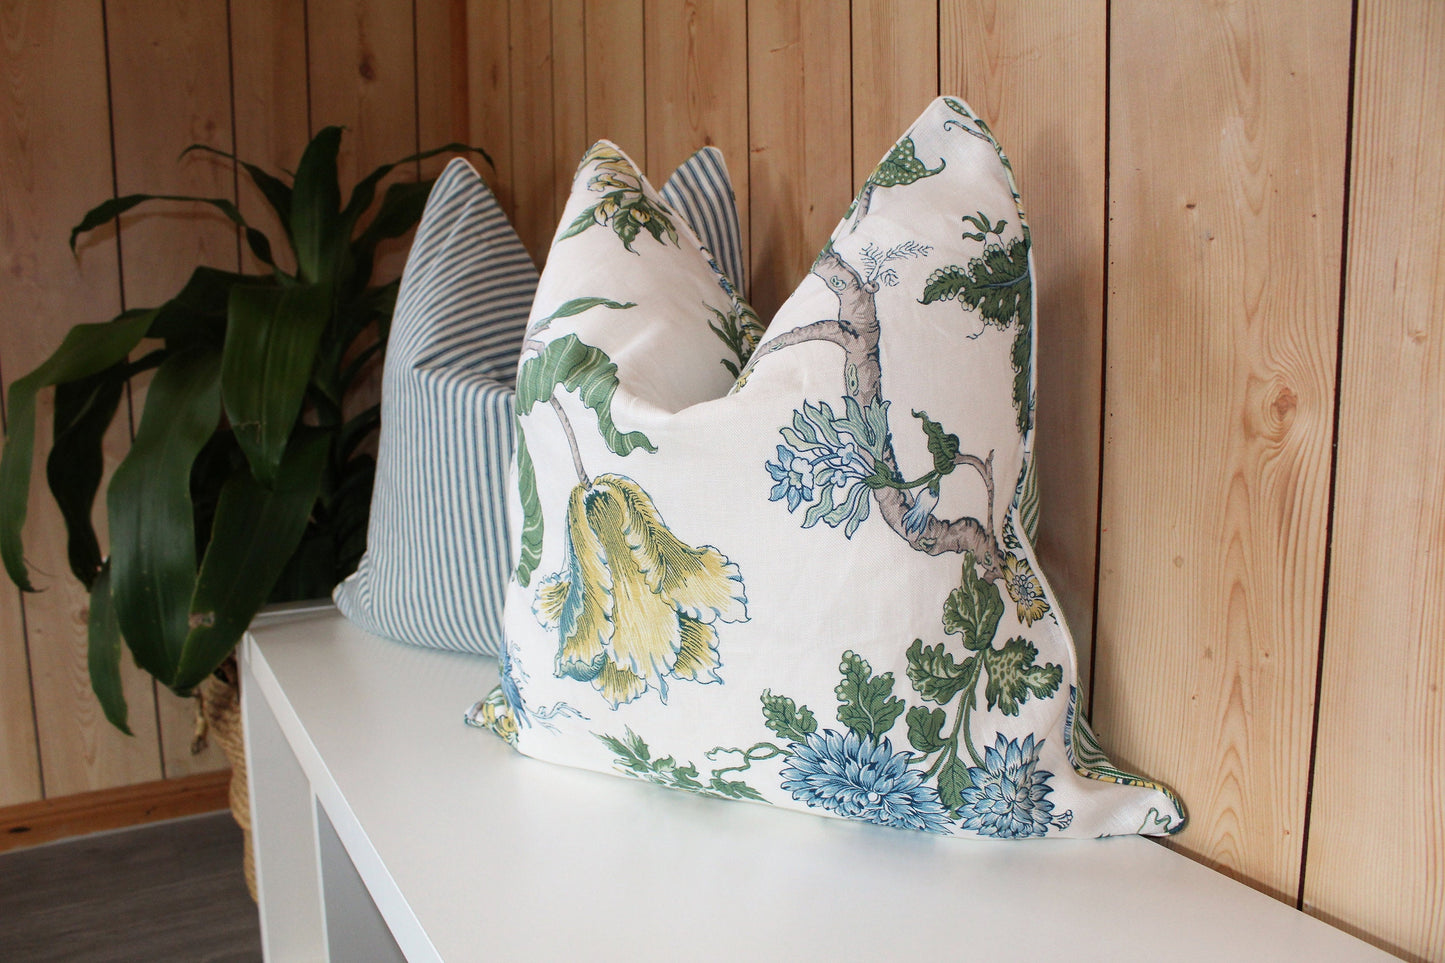 Josephine Cushion covers by Schumacher